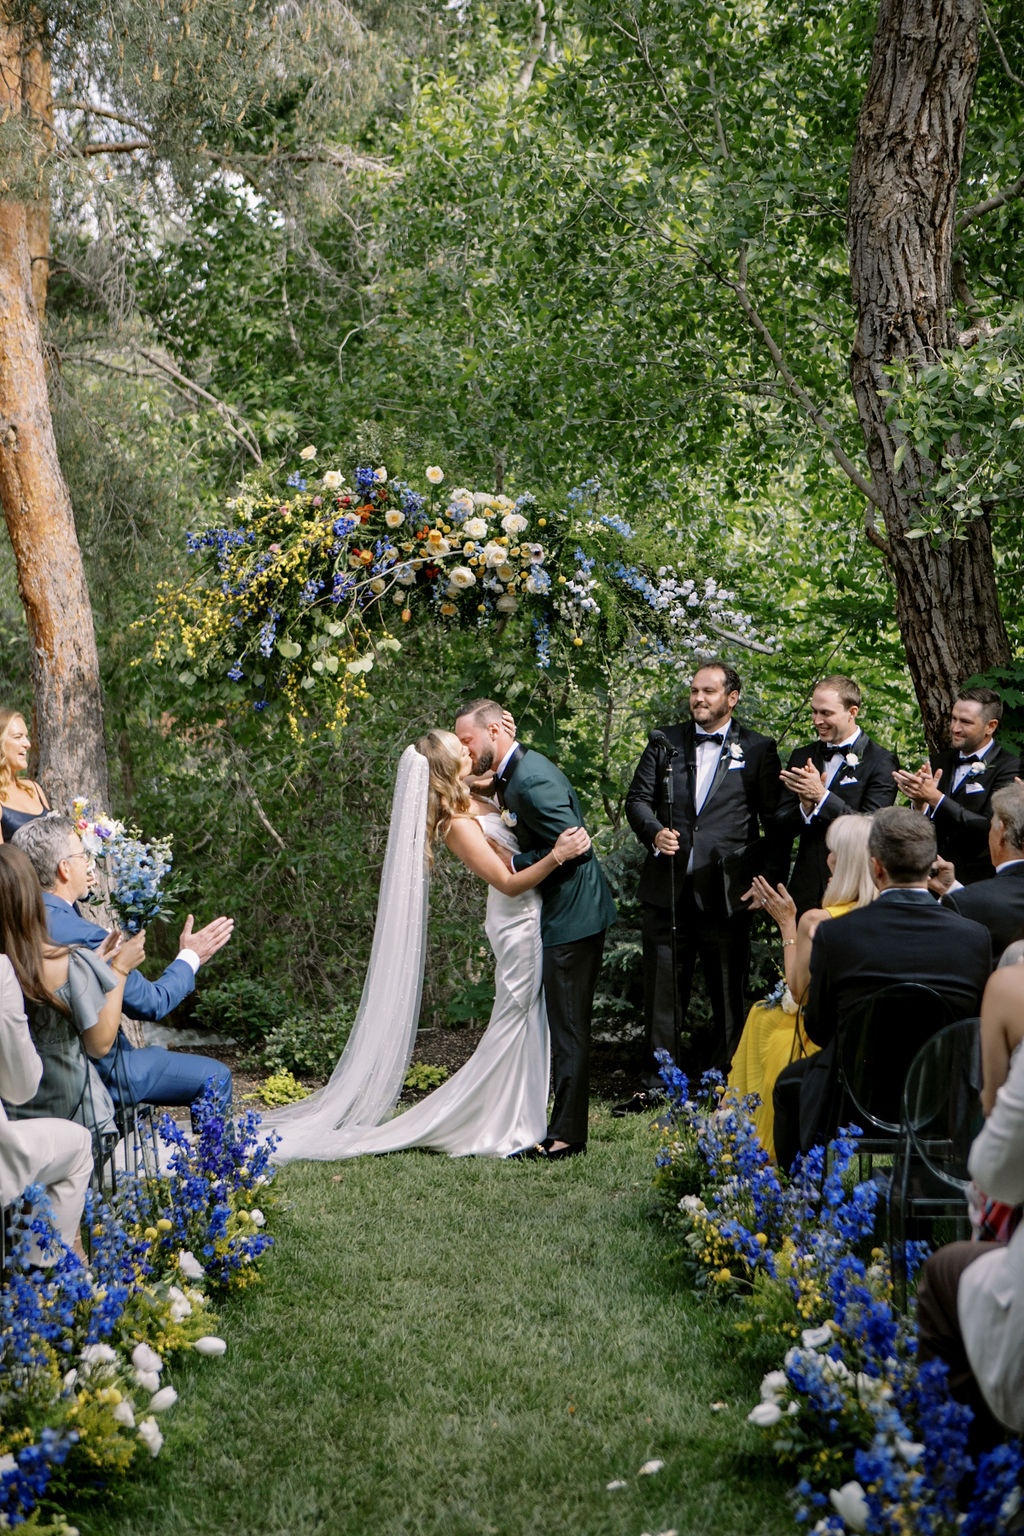 Newlywed couple shares a kiss on their wedding day in front of a stunning floral arch. Kaushay & Co Events pulls off an incredible outdoor wedding in Northern Utah. #Kaushay&Co #Kaushay&CoWeddings #Wedding #MoodySoiree #UtahWeddings #weddingplannerutah #NorthernUtahEventPlanner